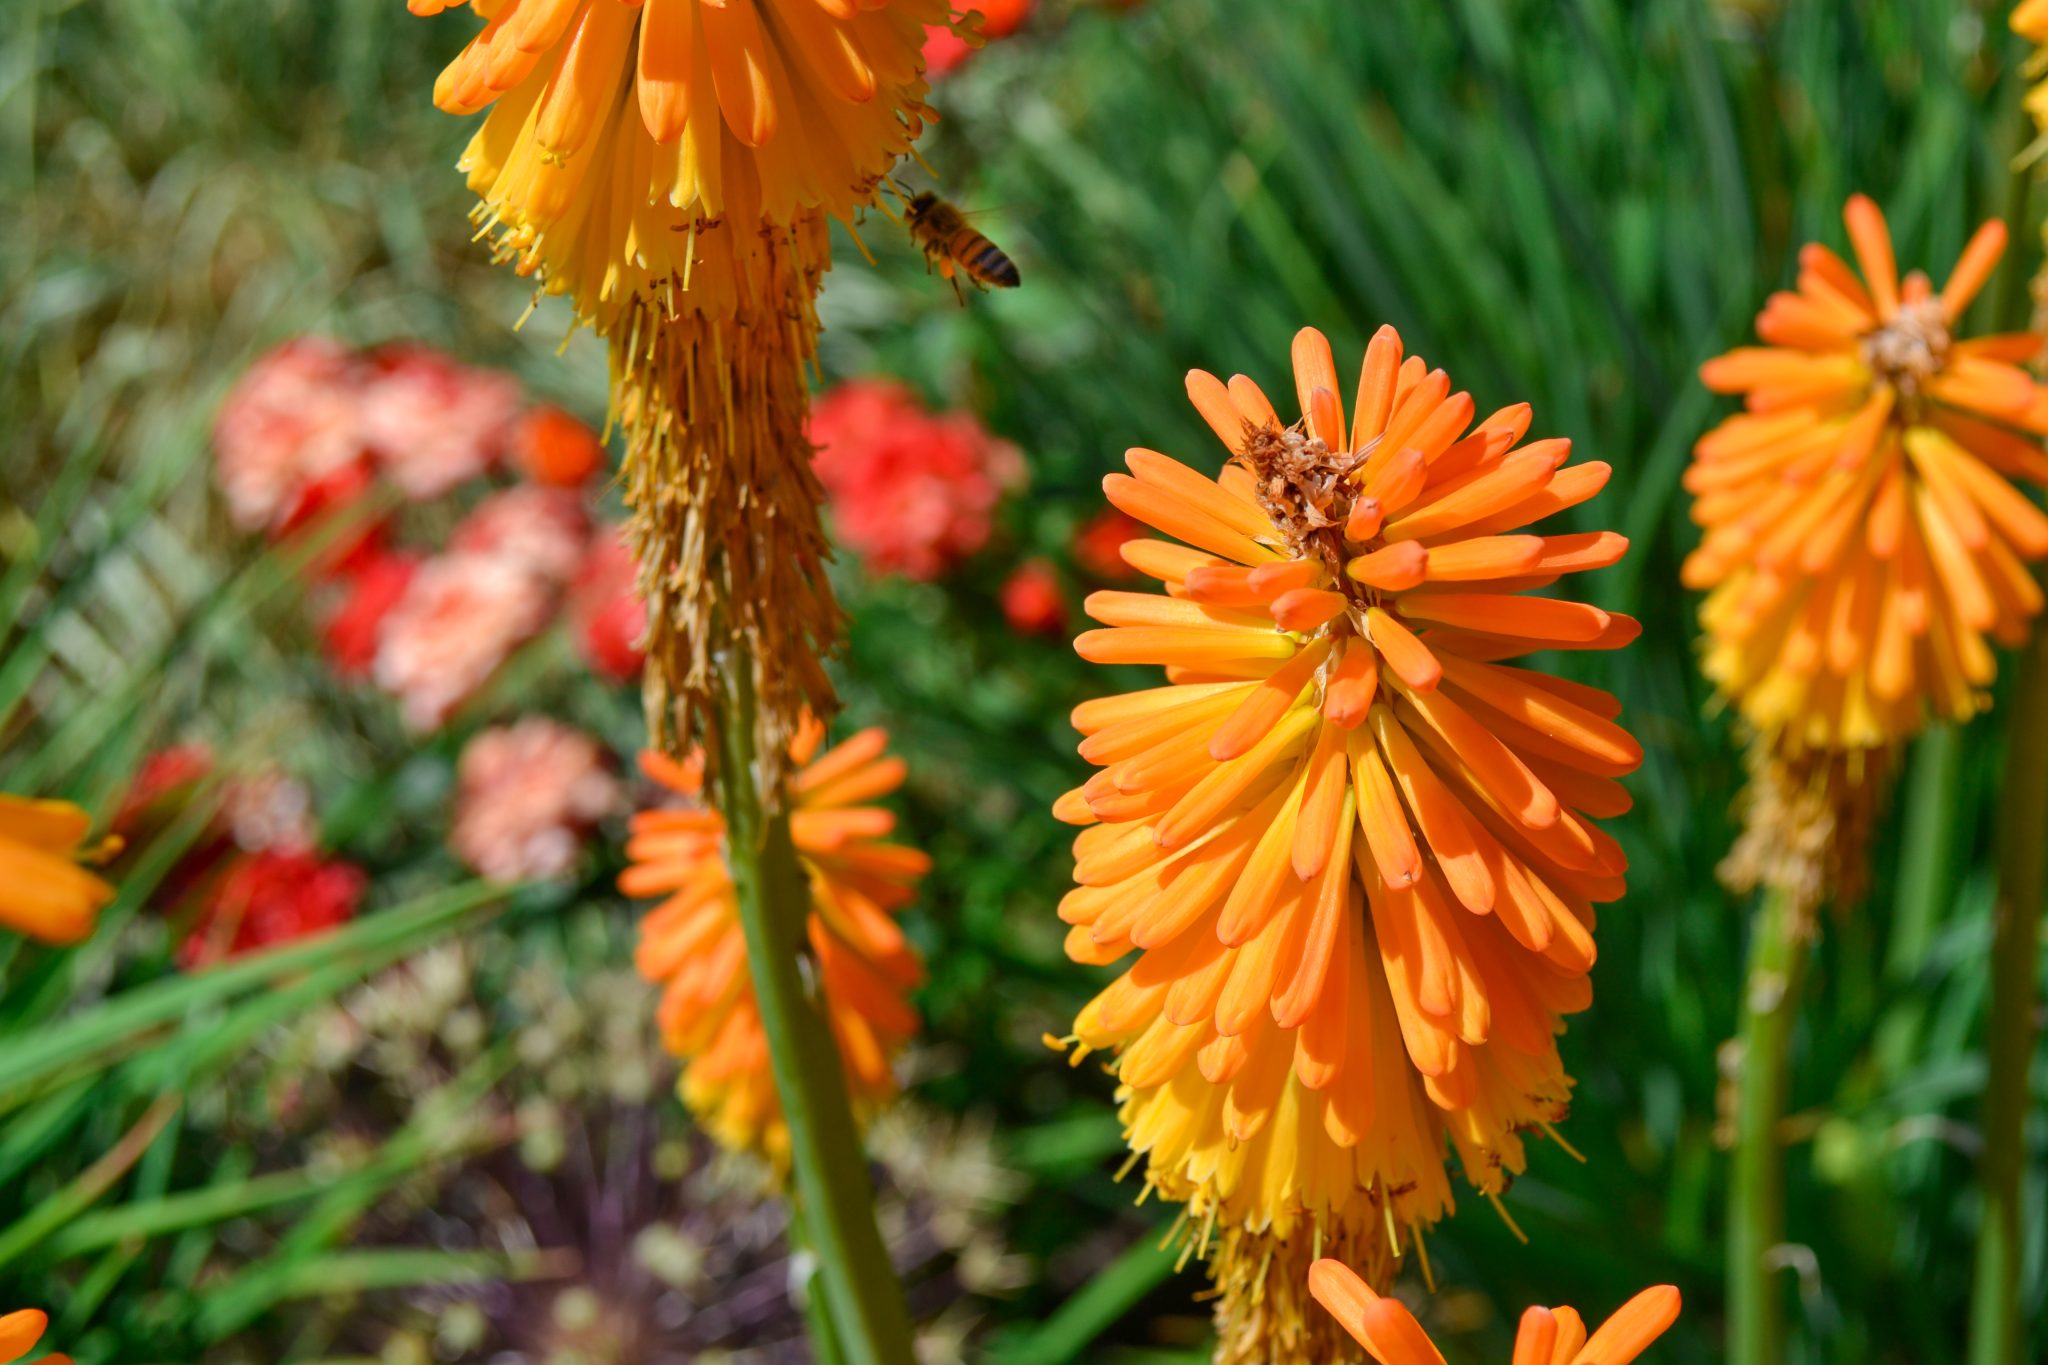 Common red hot poker